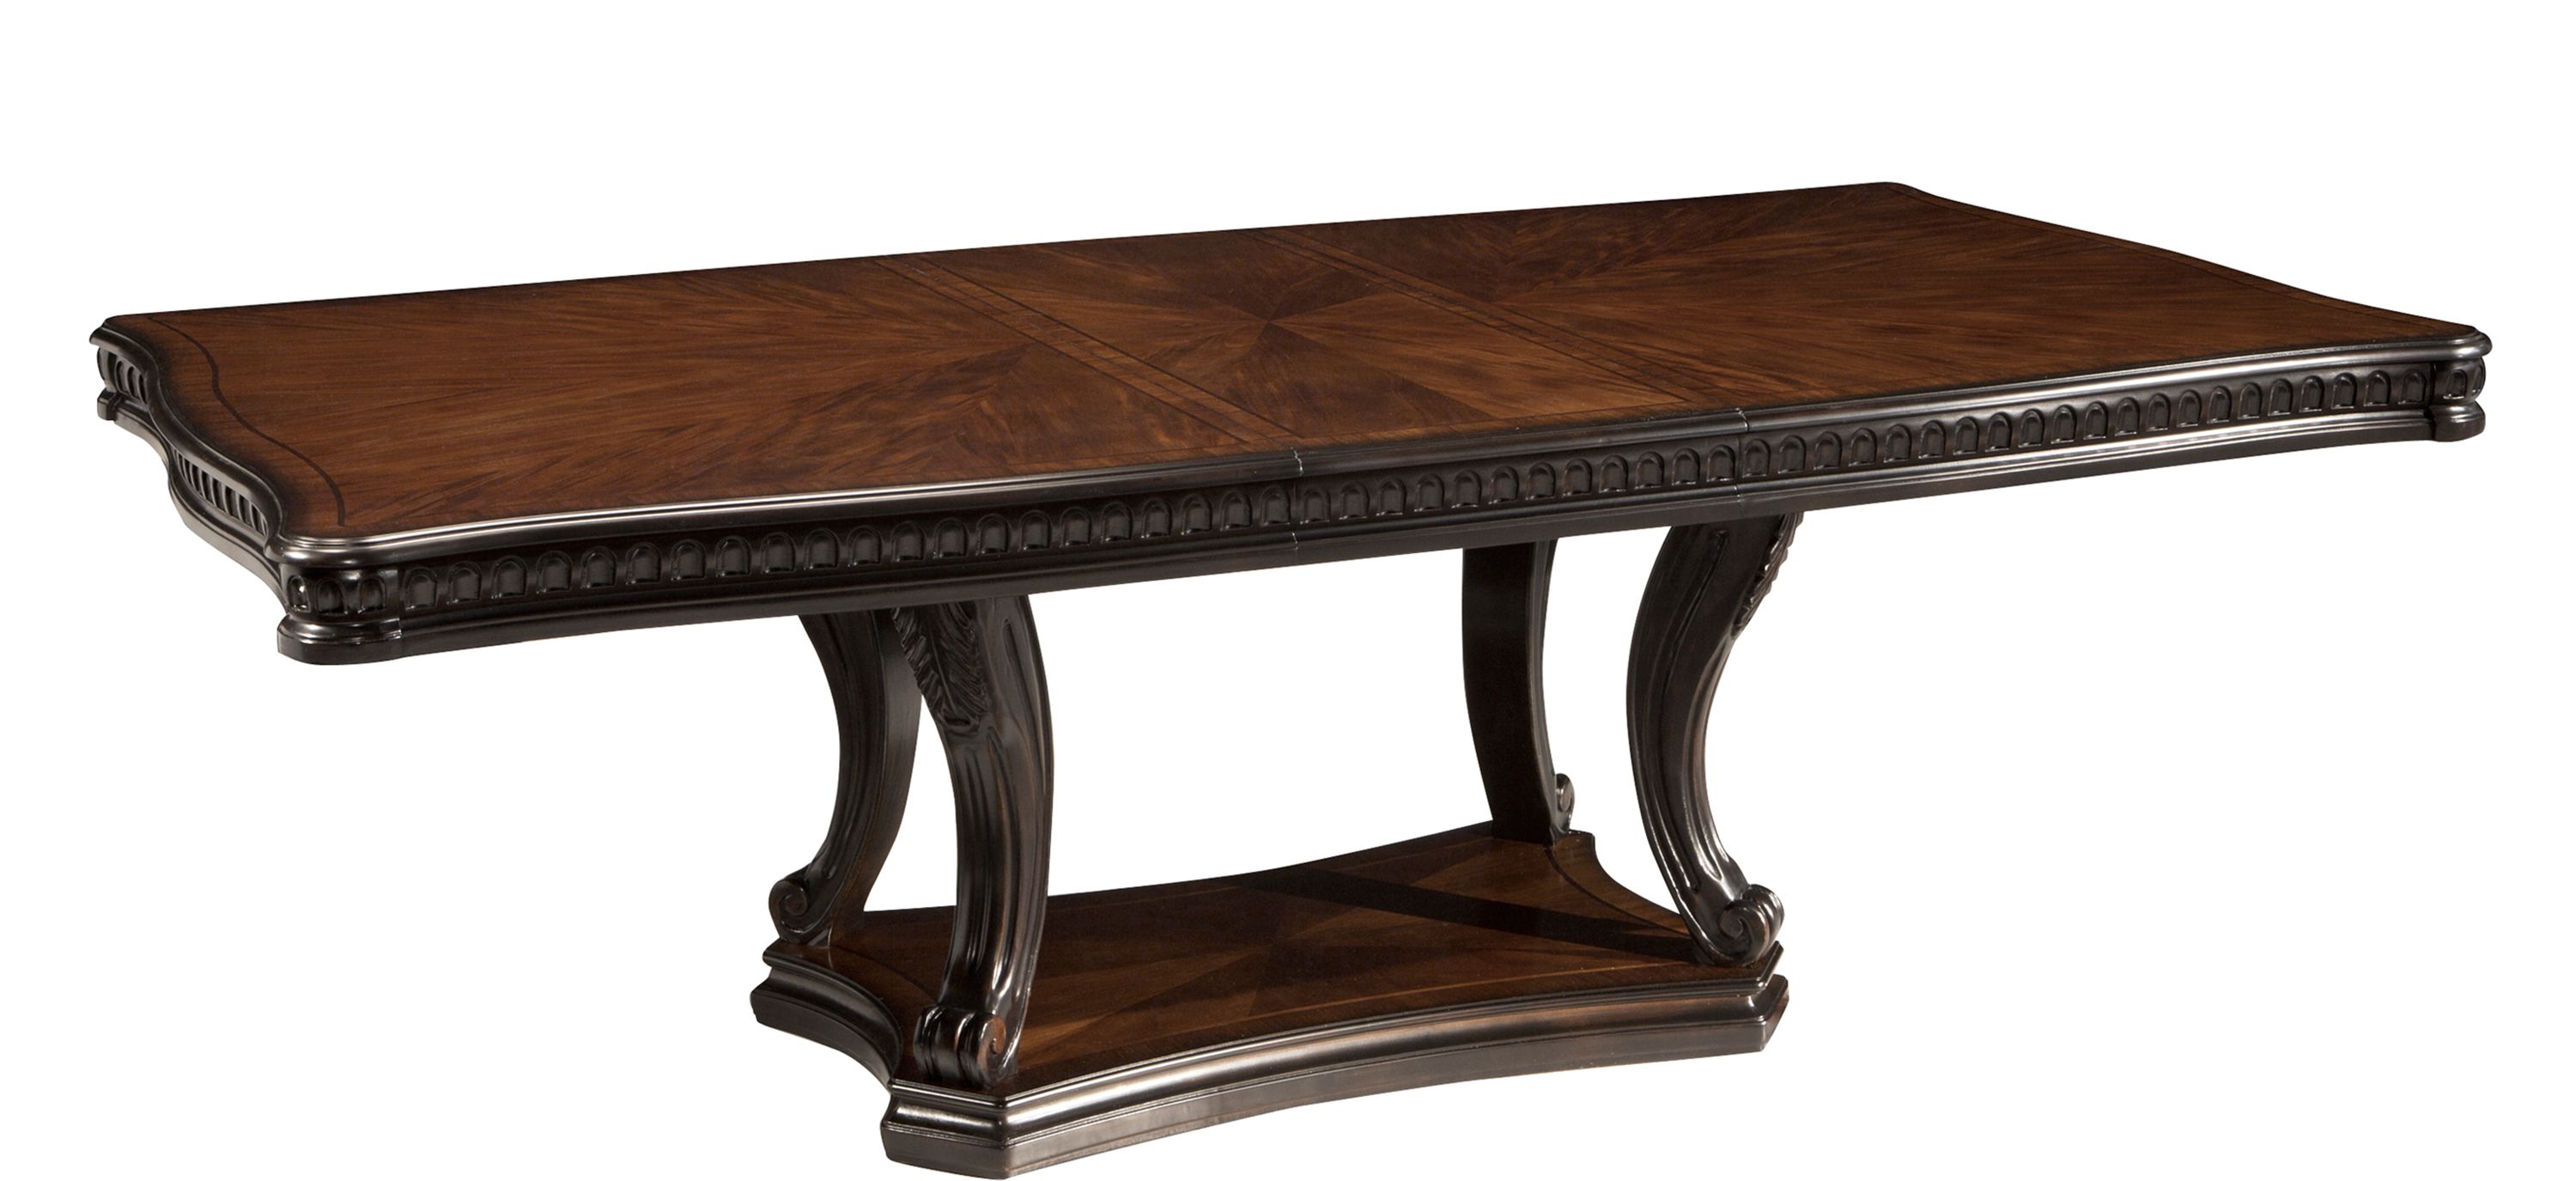 Bradford Heights Pedestal Dining Table w/Leaves